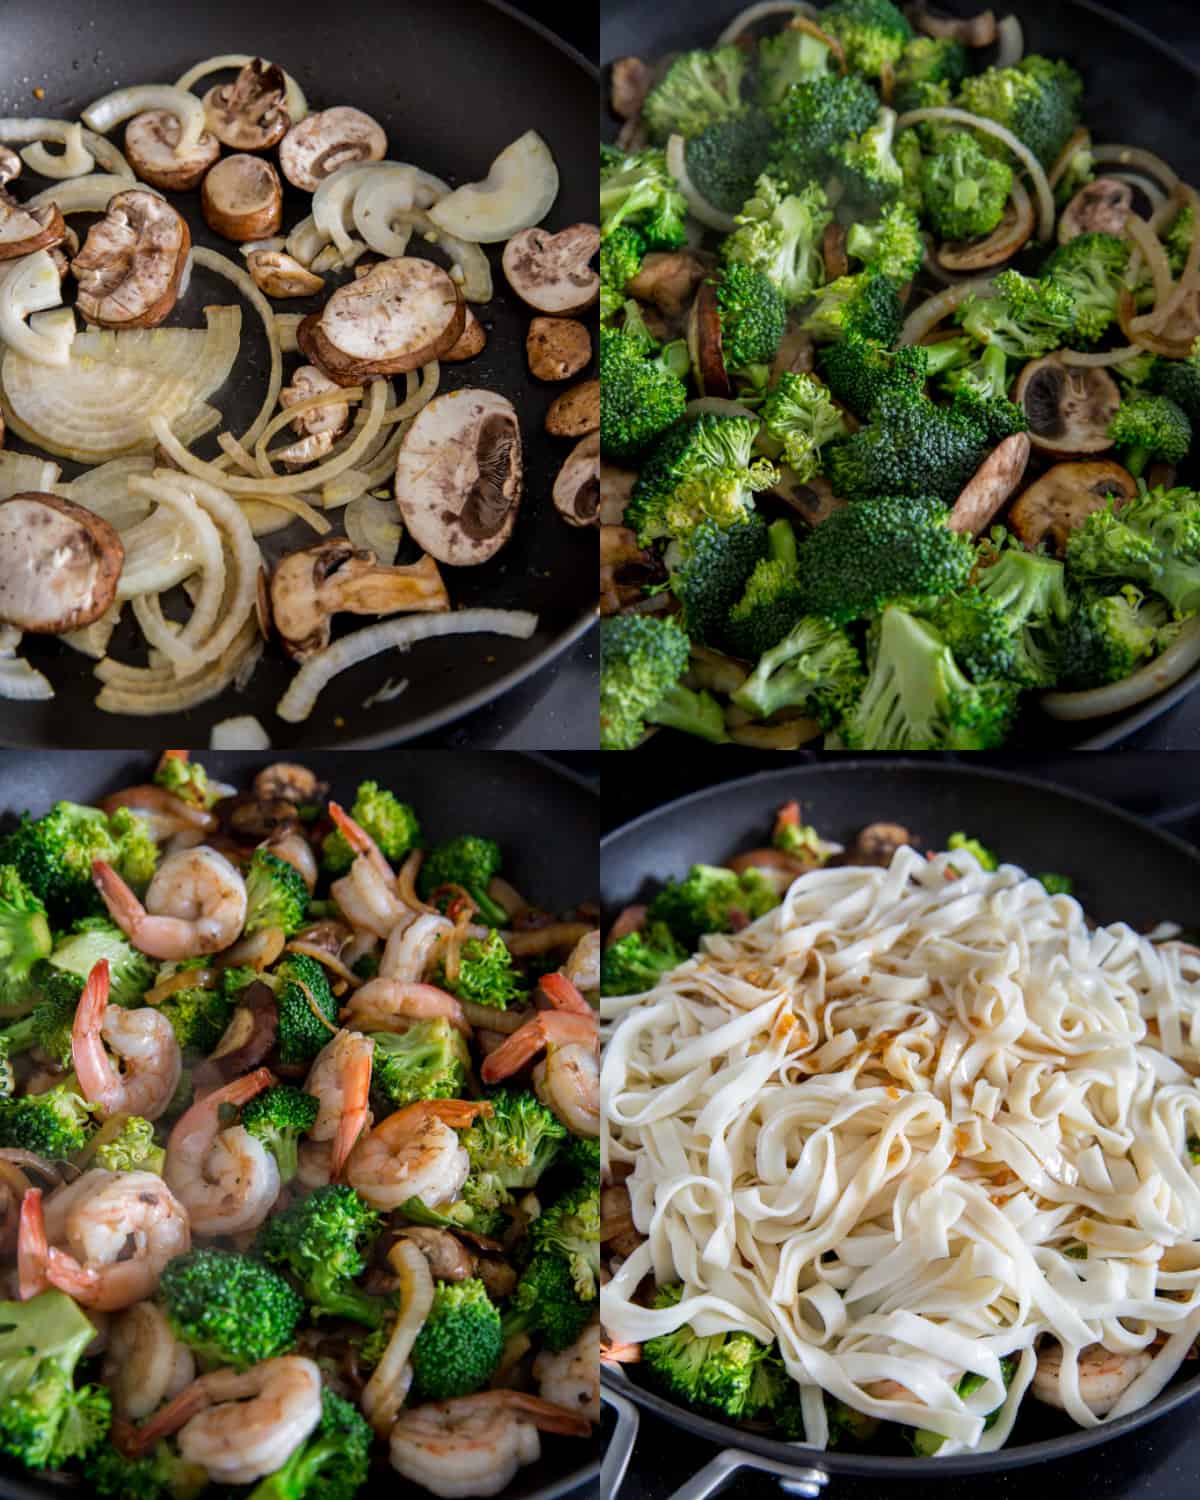 Step by step photos of making shrimp lo mein by sautéing the vegatbles and shrimp in a skillet before adding the cooked lo mein noodles and sauce.